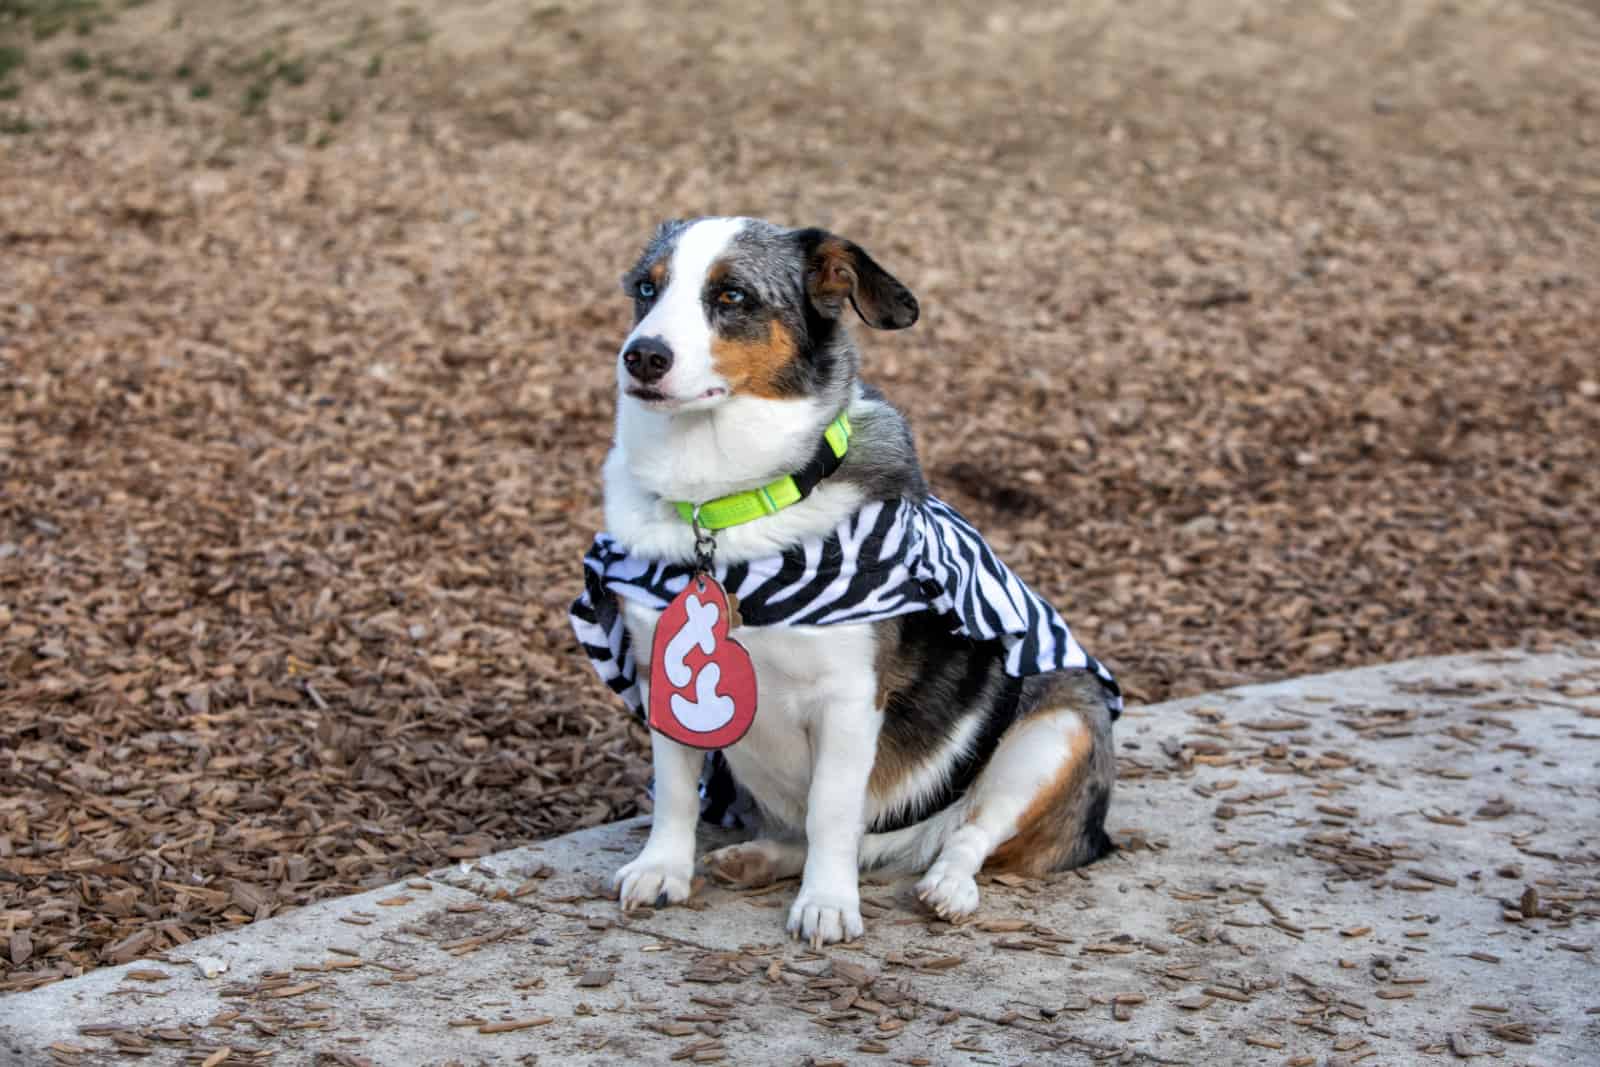 Seated Corgi Australian Shepherd mix wearing a zebra costume and a heart attached to a collar